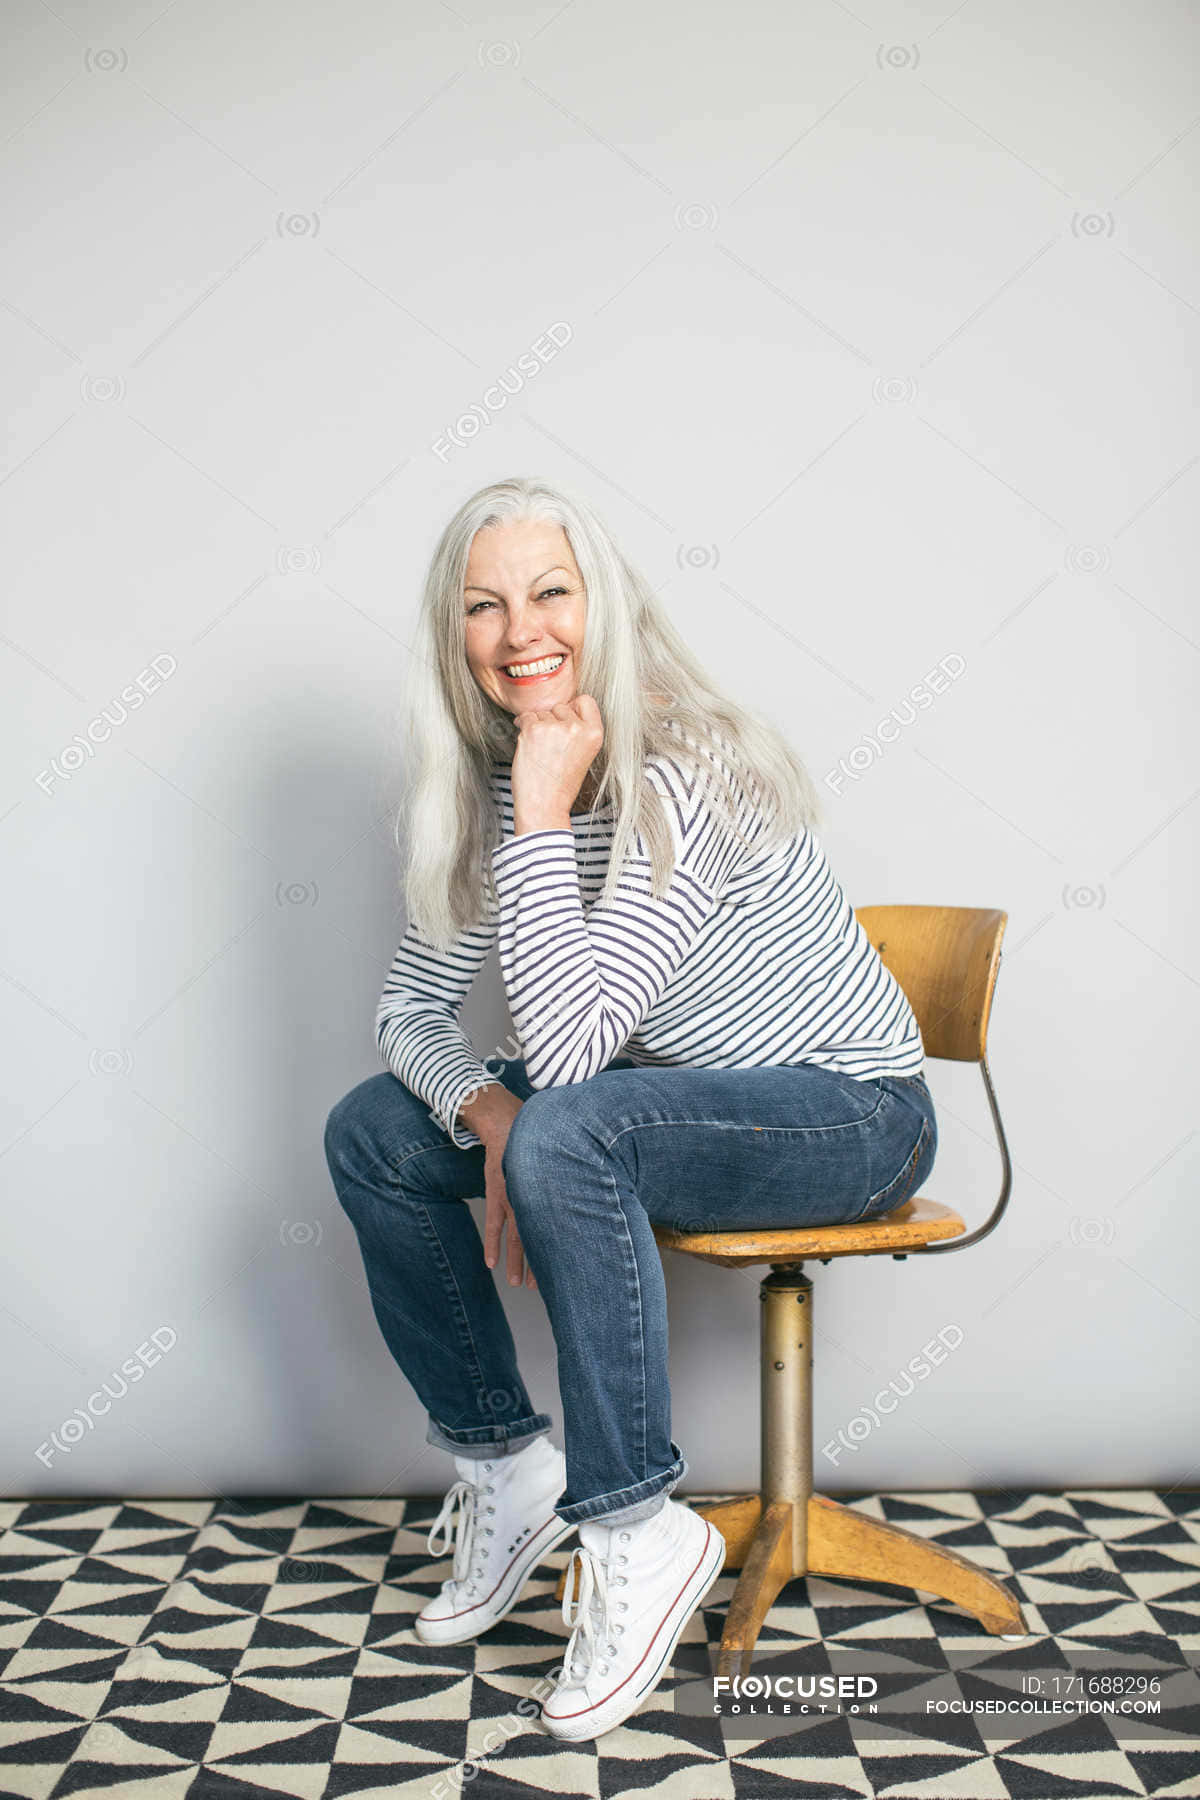 A Woman Sitting On A Chair